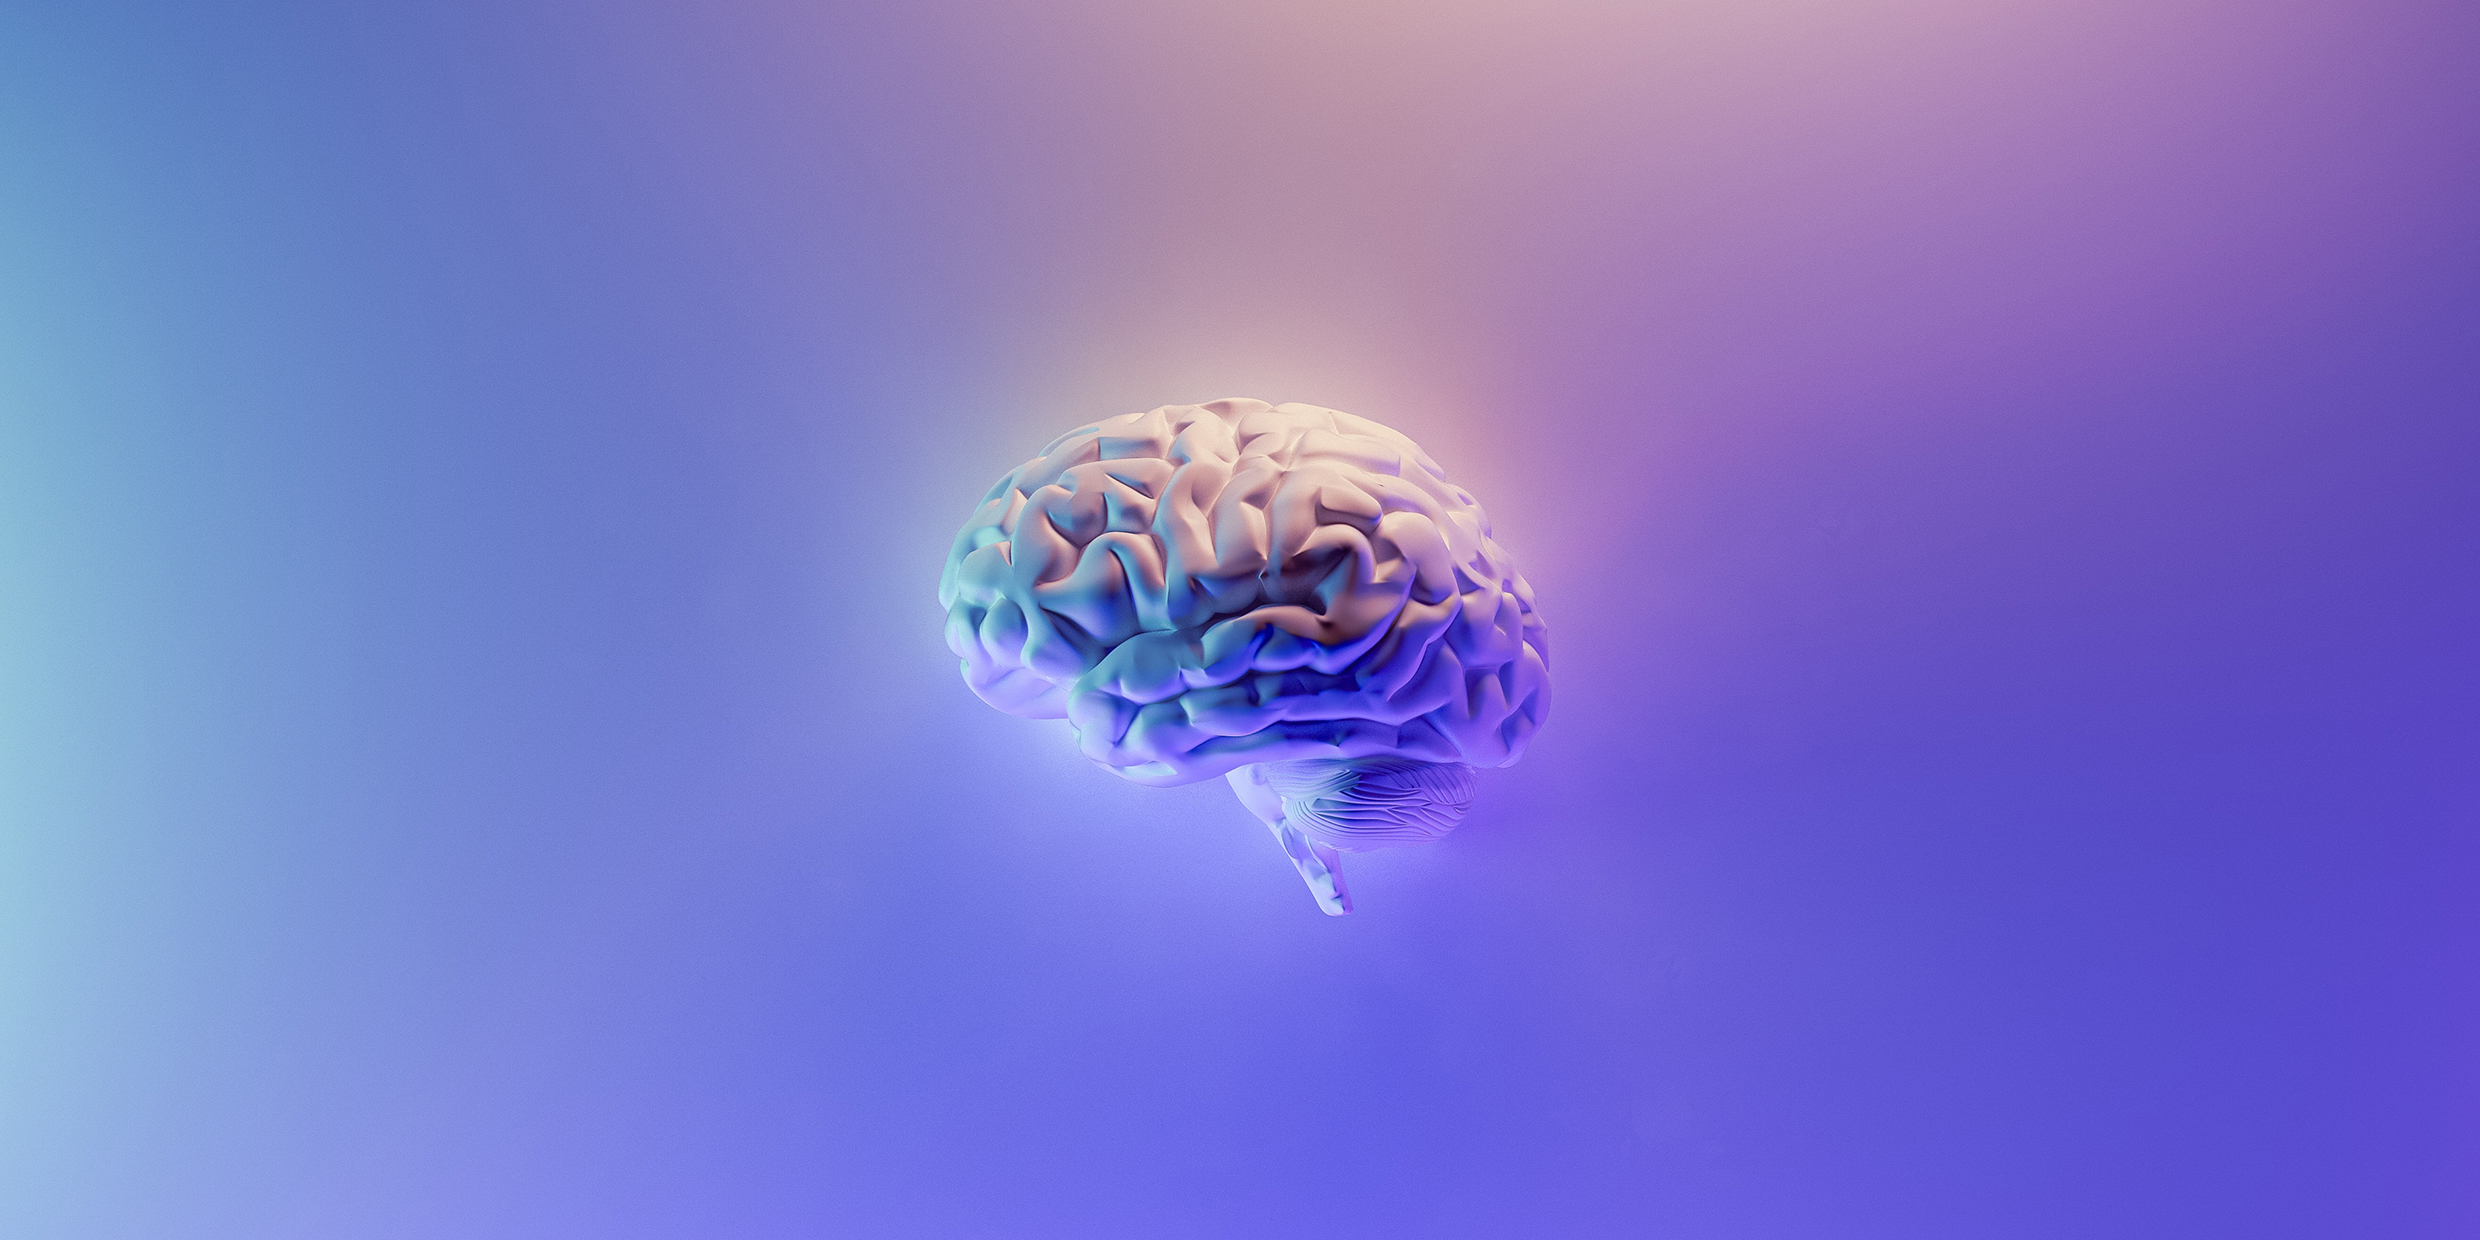 Artistic 3d rendering of the human brain against a purple background